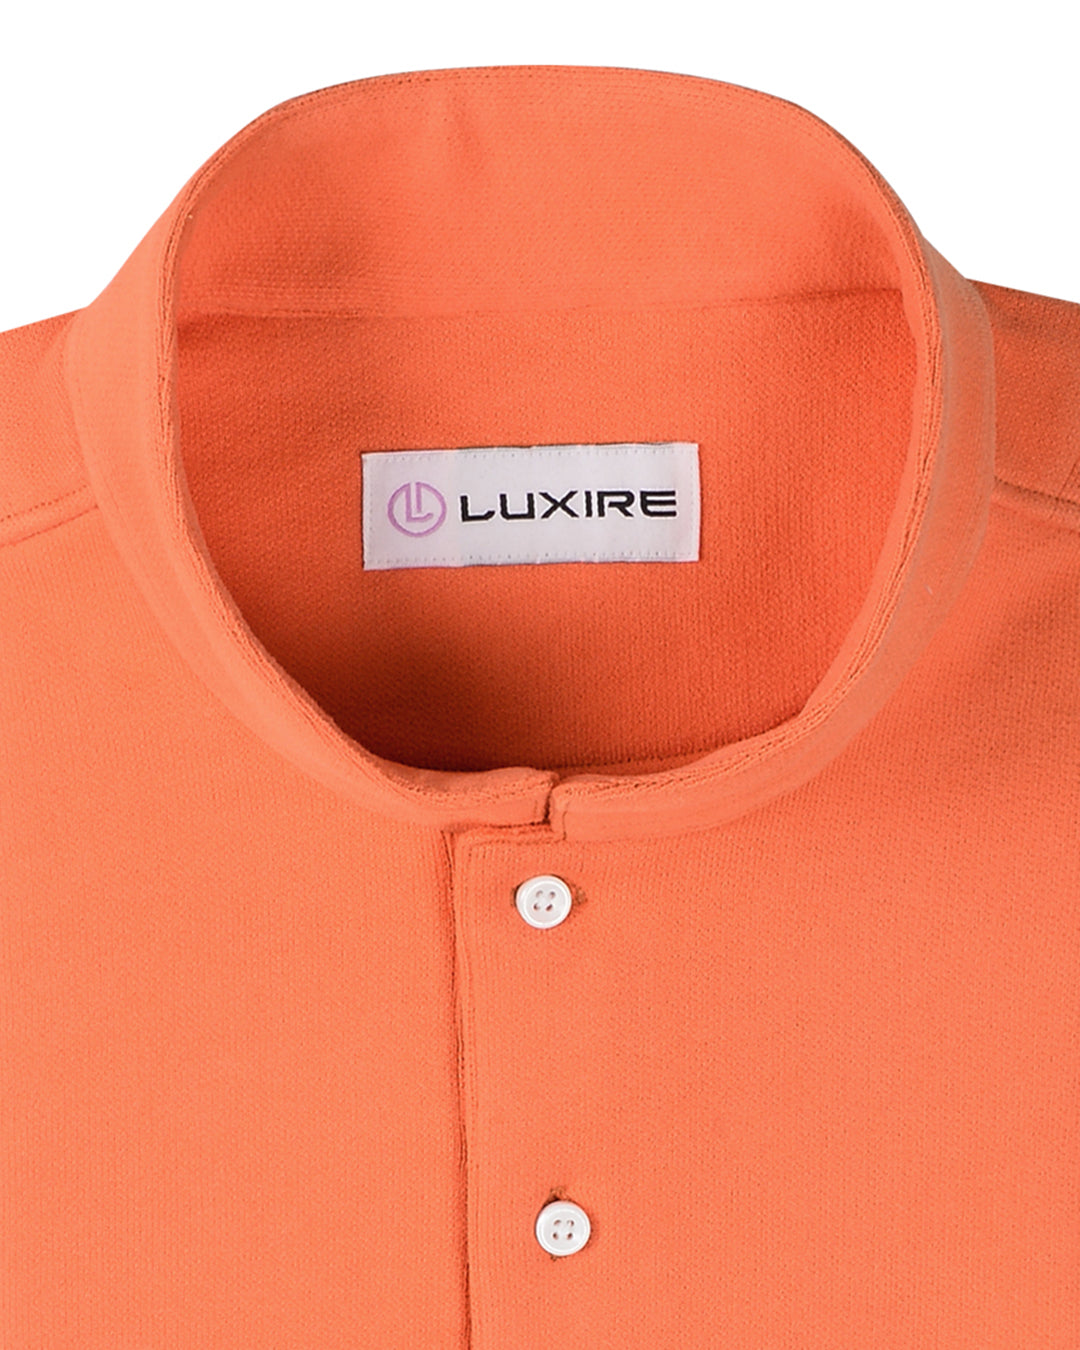 Collar of the custom oxford polo shirt for men by Luxire in bright orange